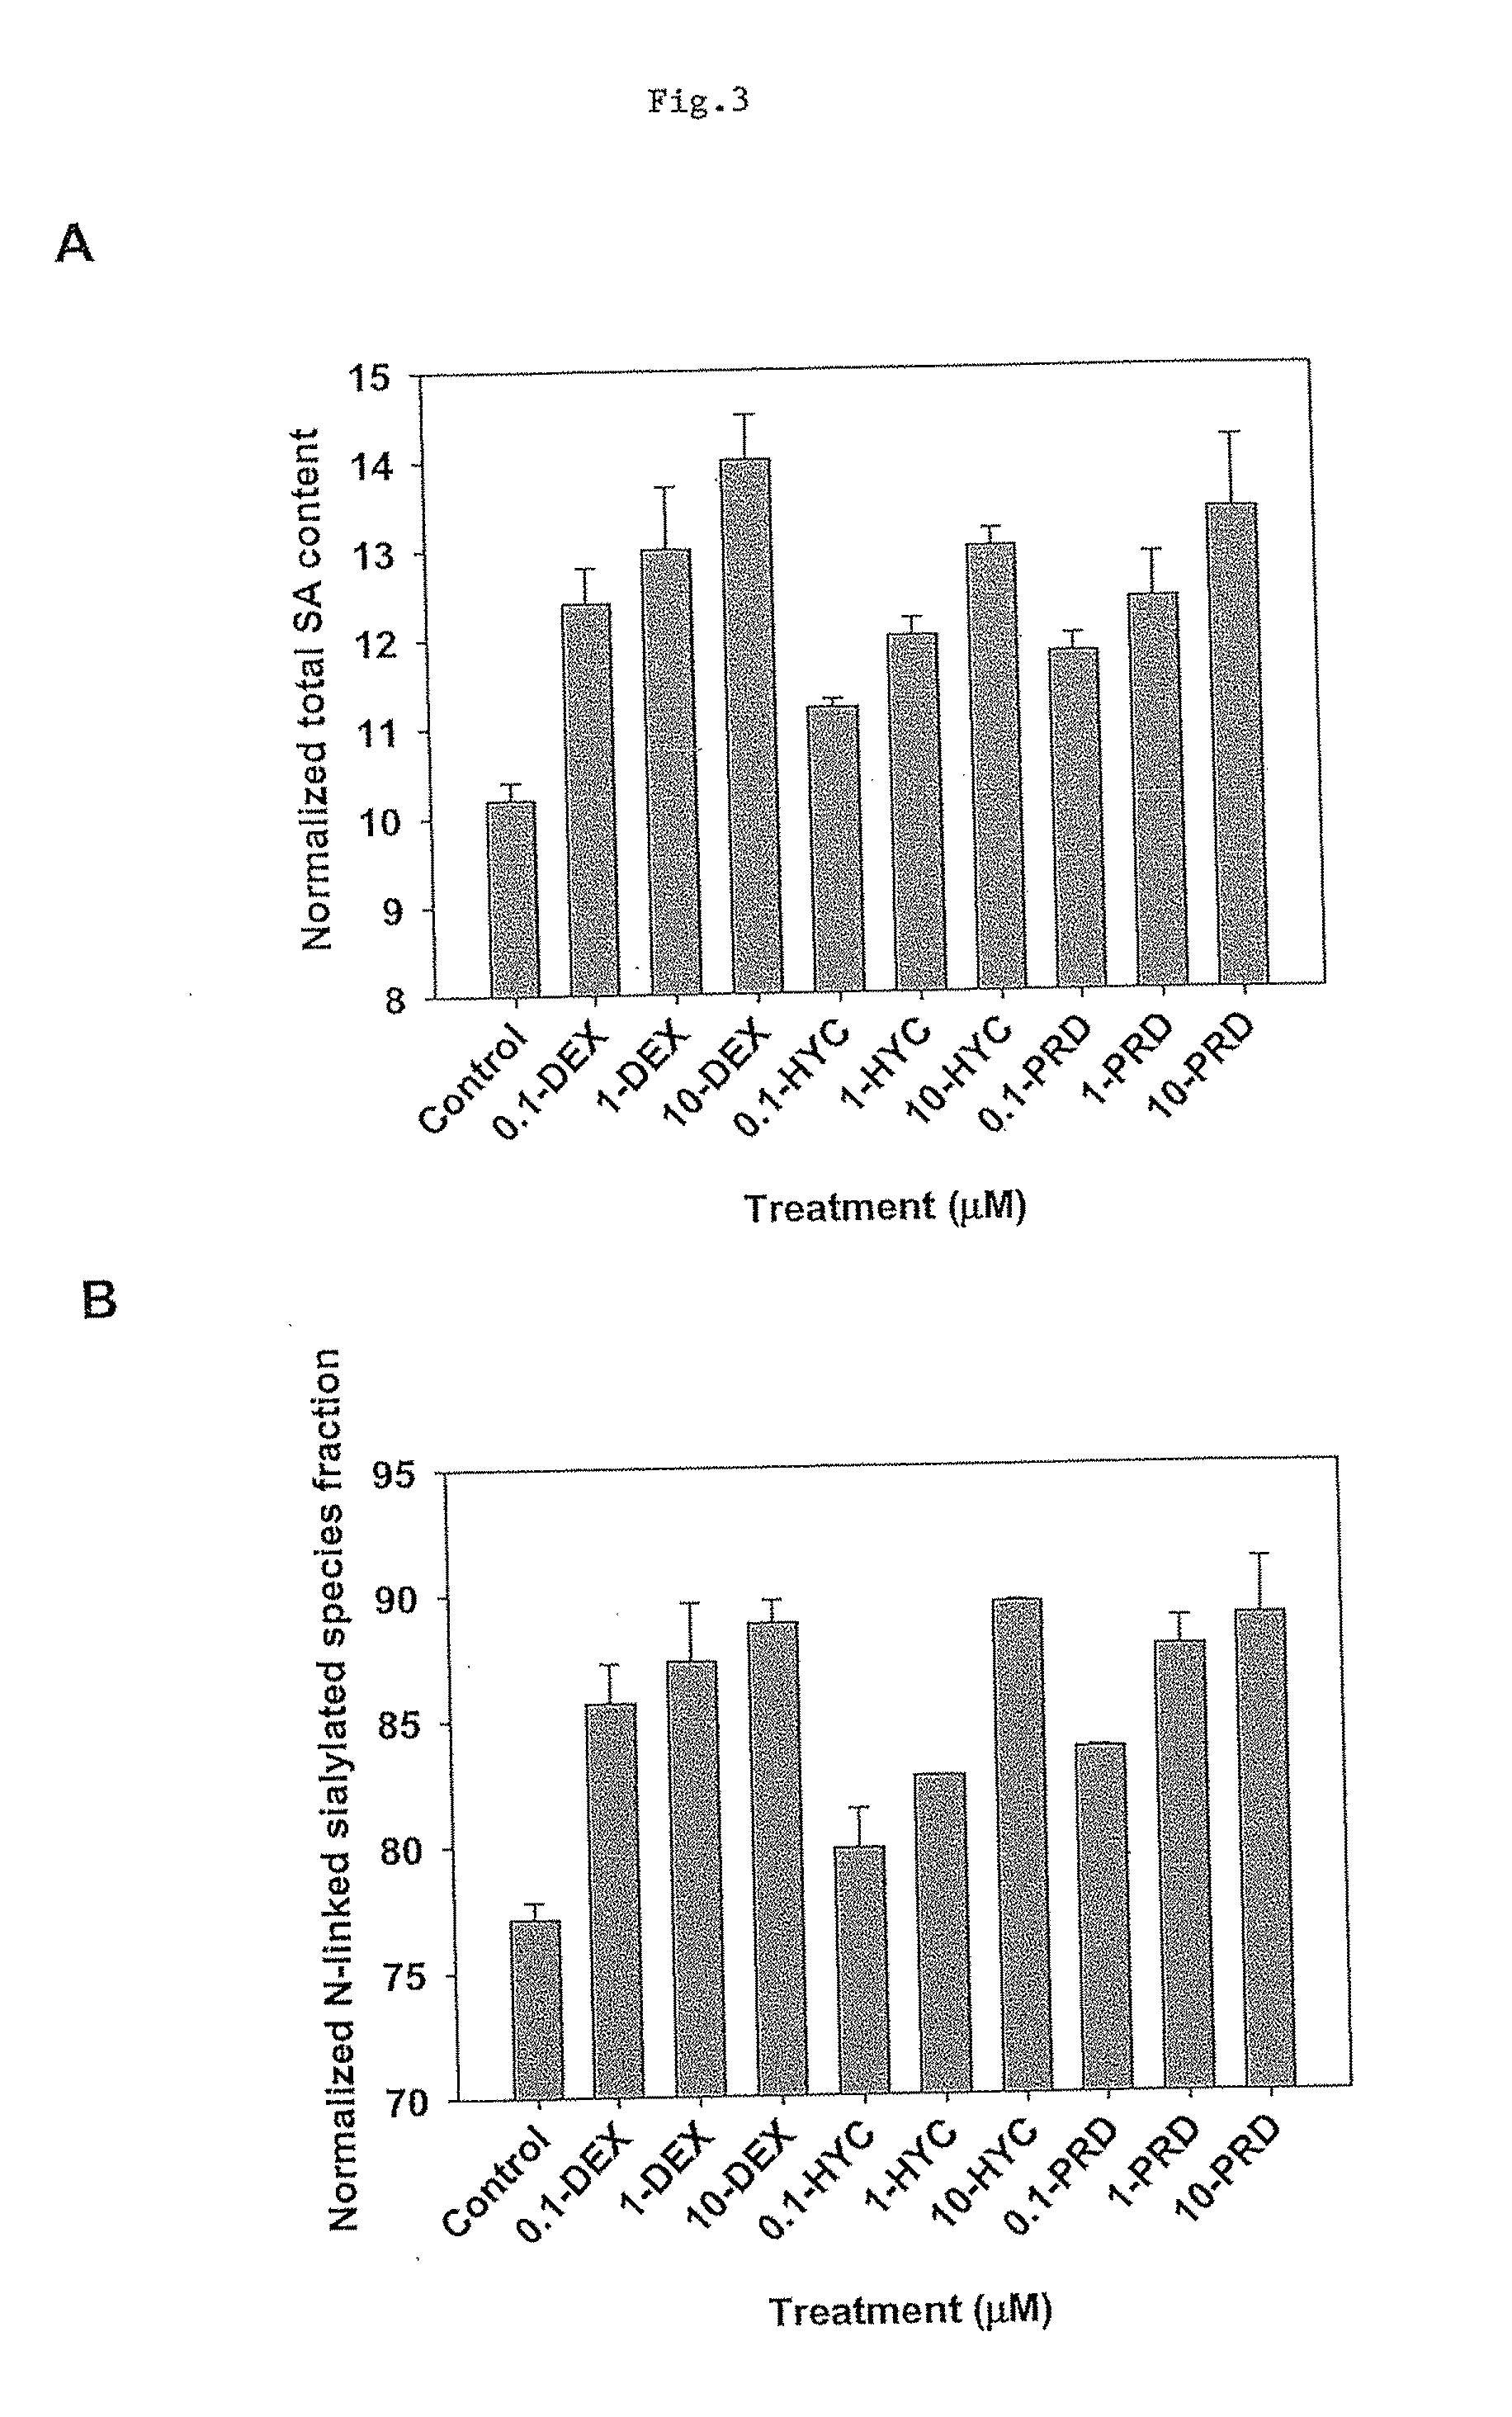 Mammalian cell culture processes for protein production